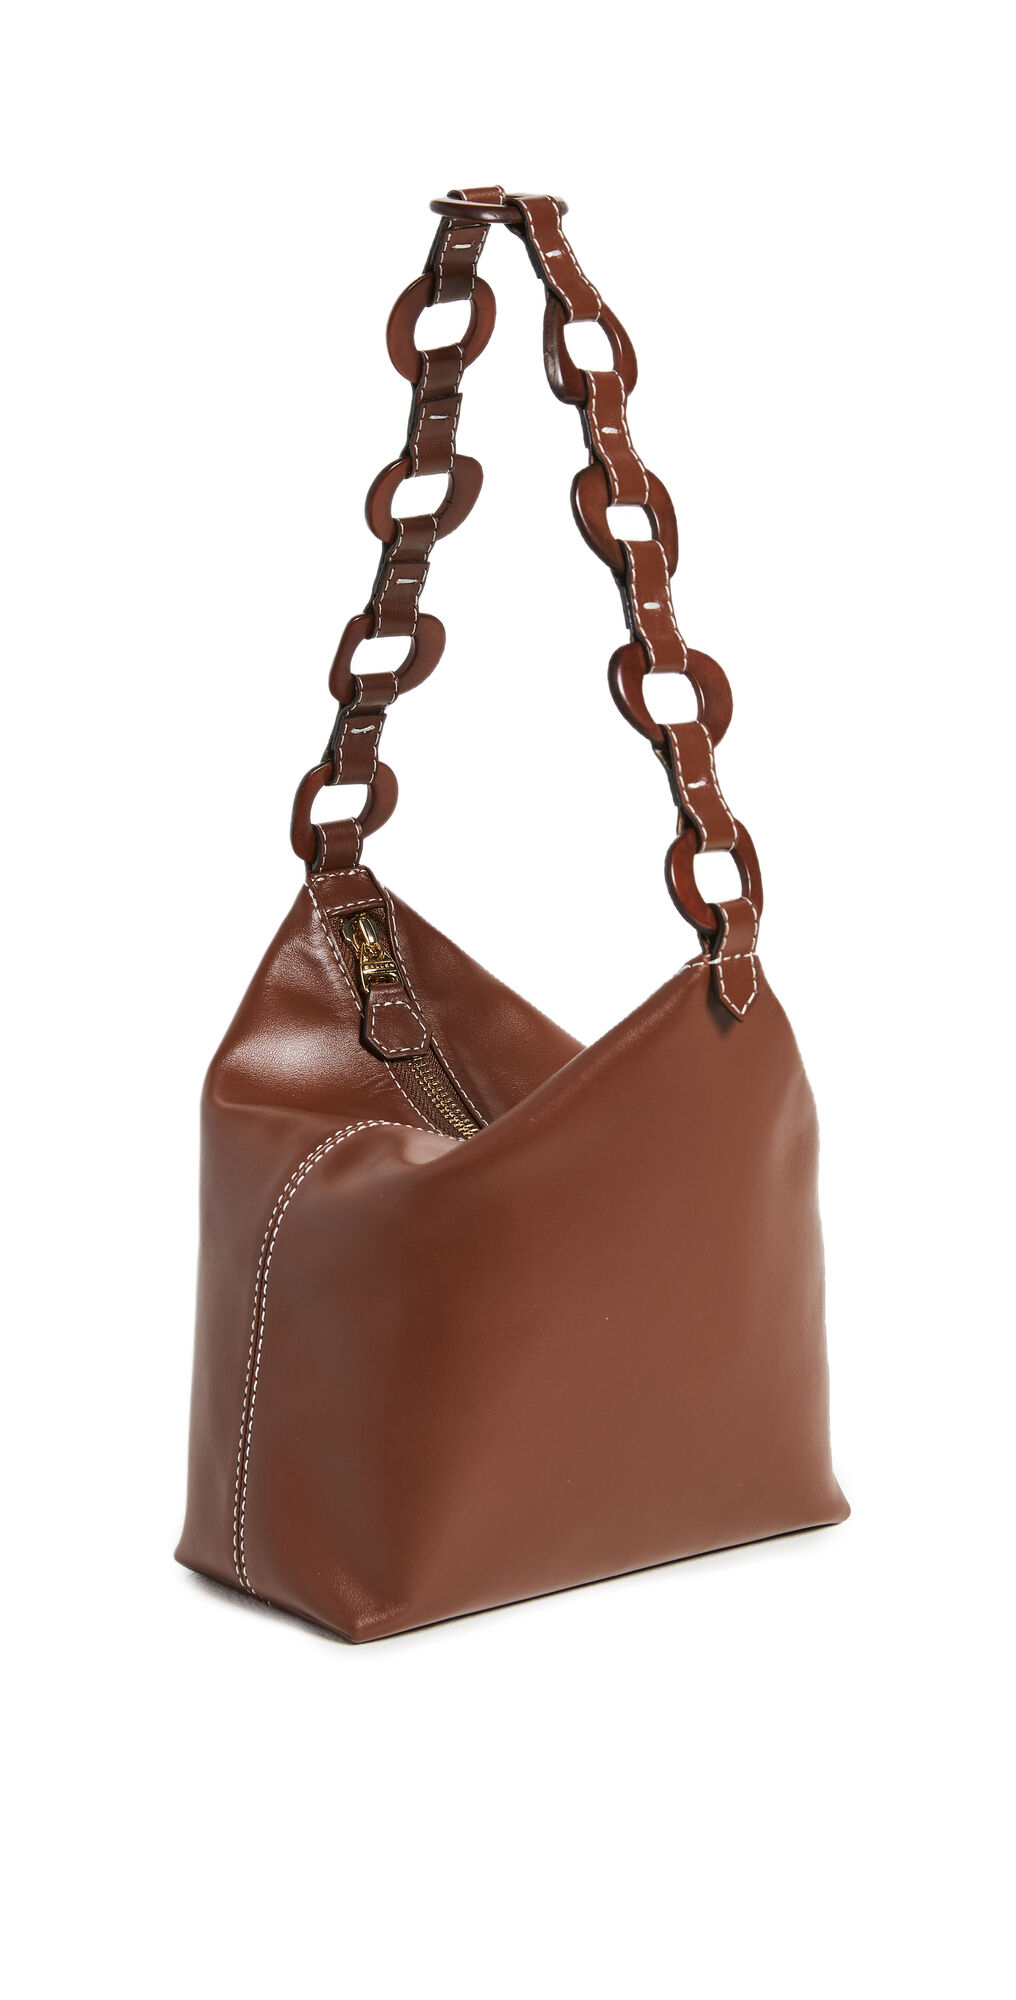 Ballen Tagua Fortuna Napa Bag Brown One Size  Brown  size:One Size